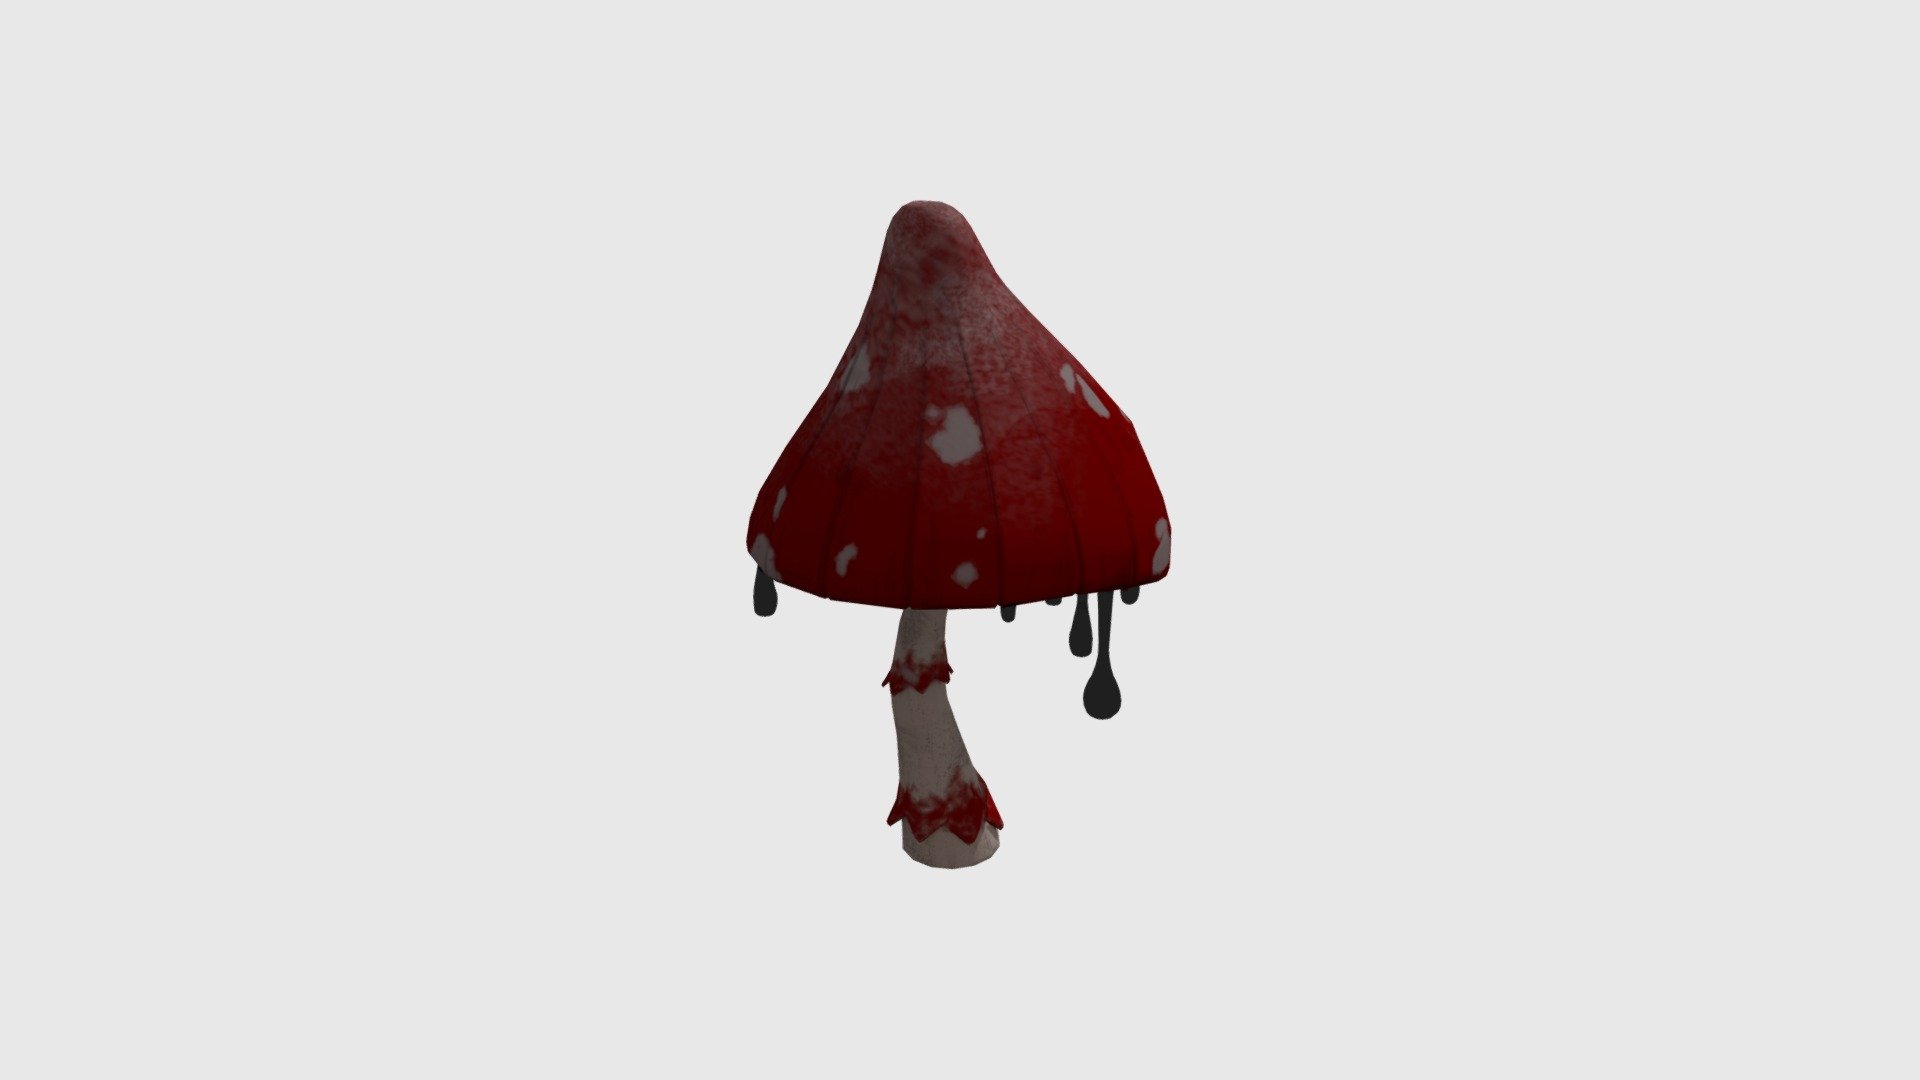 This is a musroom fly agaric model, fantasy styles
including FBX formats
lov poly
polygons-2531
verts -2610
textures maps from 2048x2048
created in Maya 2019 / ZBrash2021 / Substance Painter 7.3.0 / Marmoset Tool Bug 4 - musroom fly agaric - 3D model by merryneek 3d model